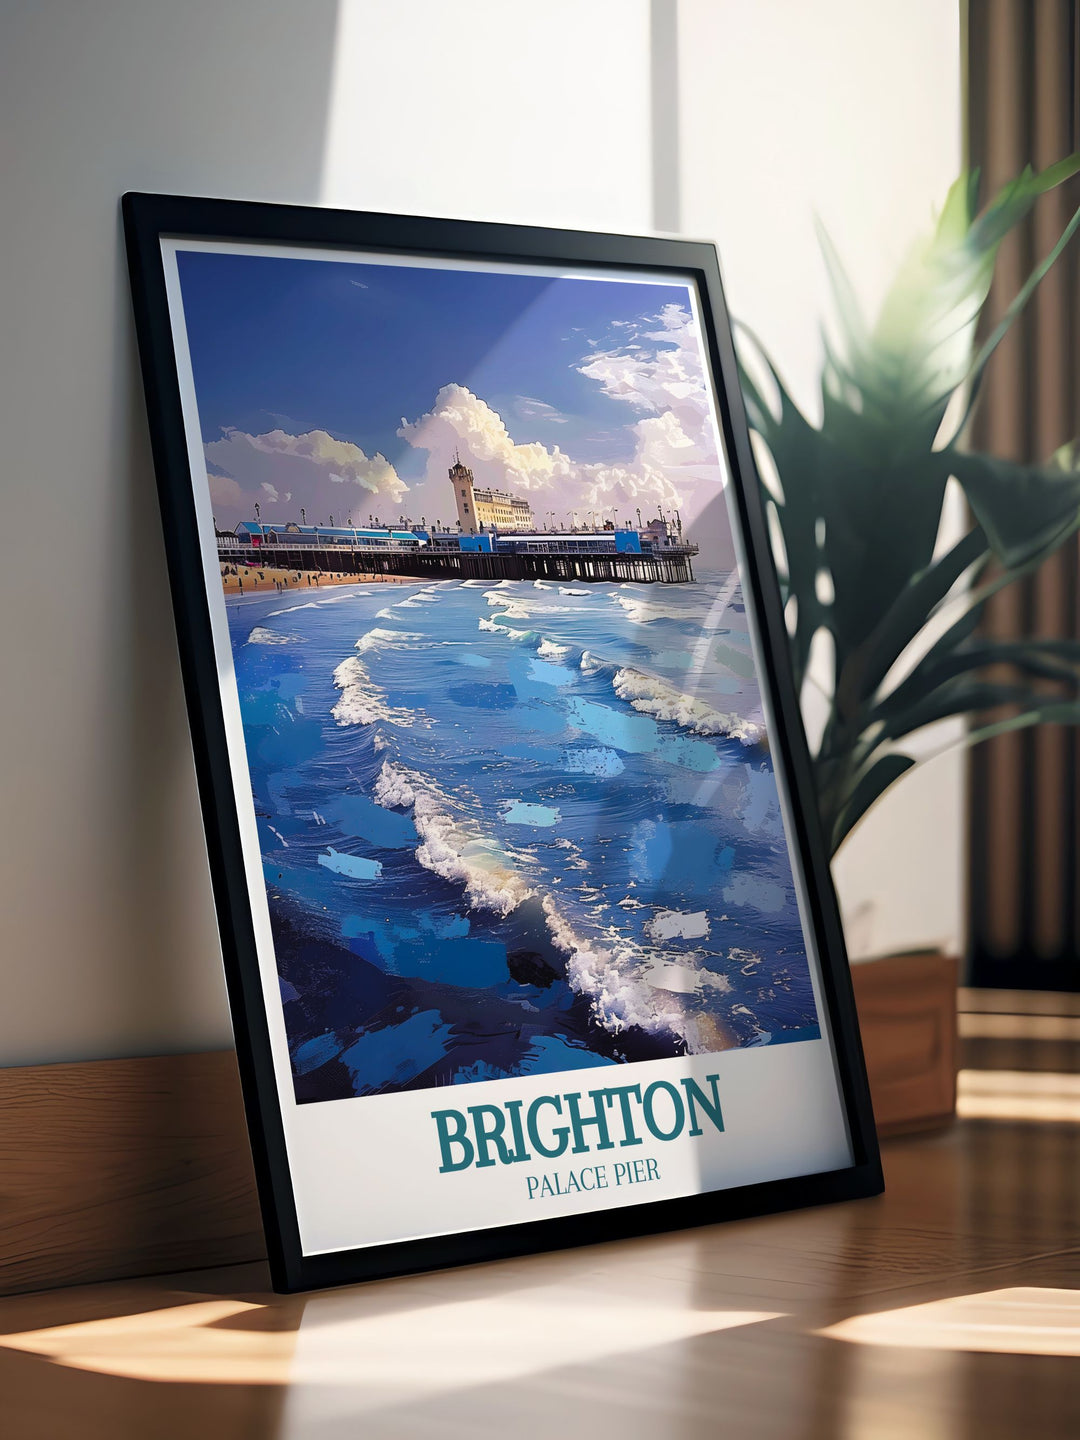 Art Deco print of Brighton Beach with the stunning English Channel in the background a beautiful retro travel poster that adds a touch of elegance and nostalgic charm to any interior space.